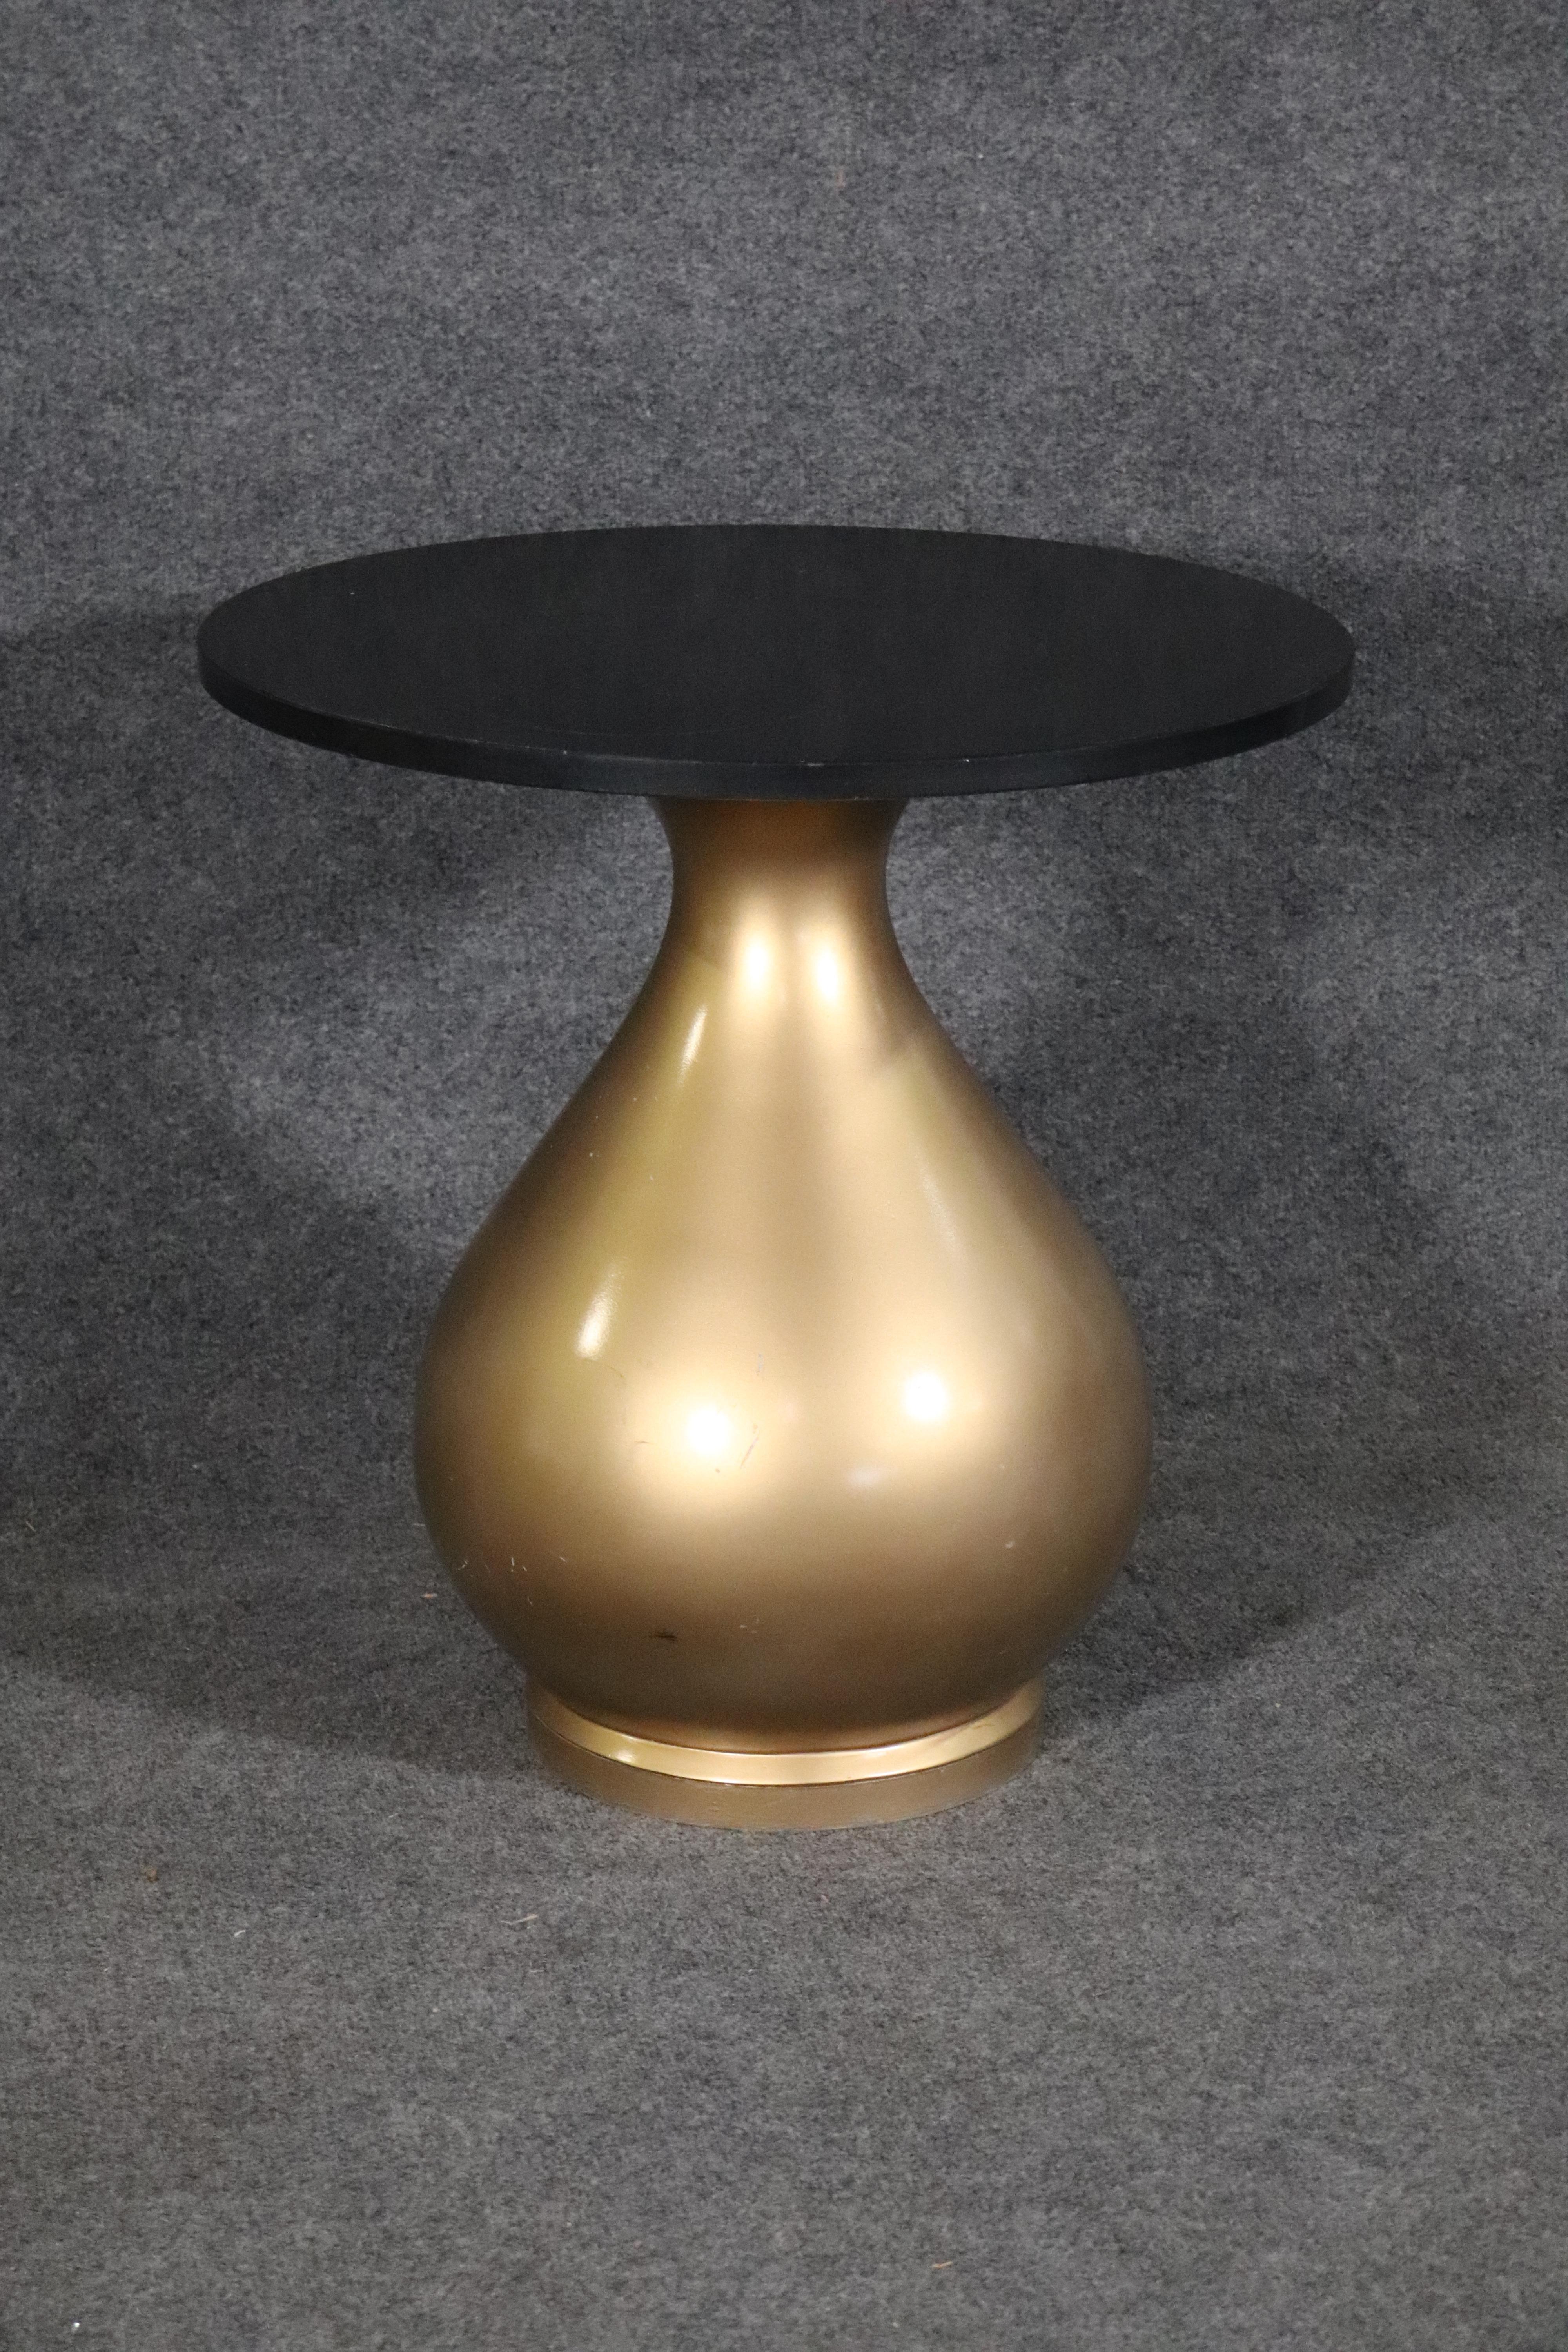 Round marble top end table with gold painted base.
Please confirm location NY or NJ.